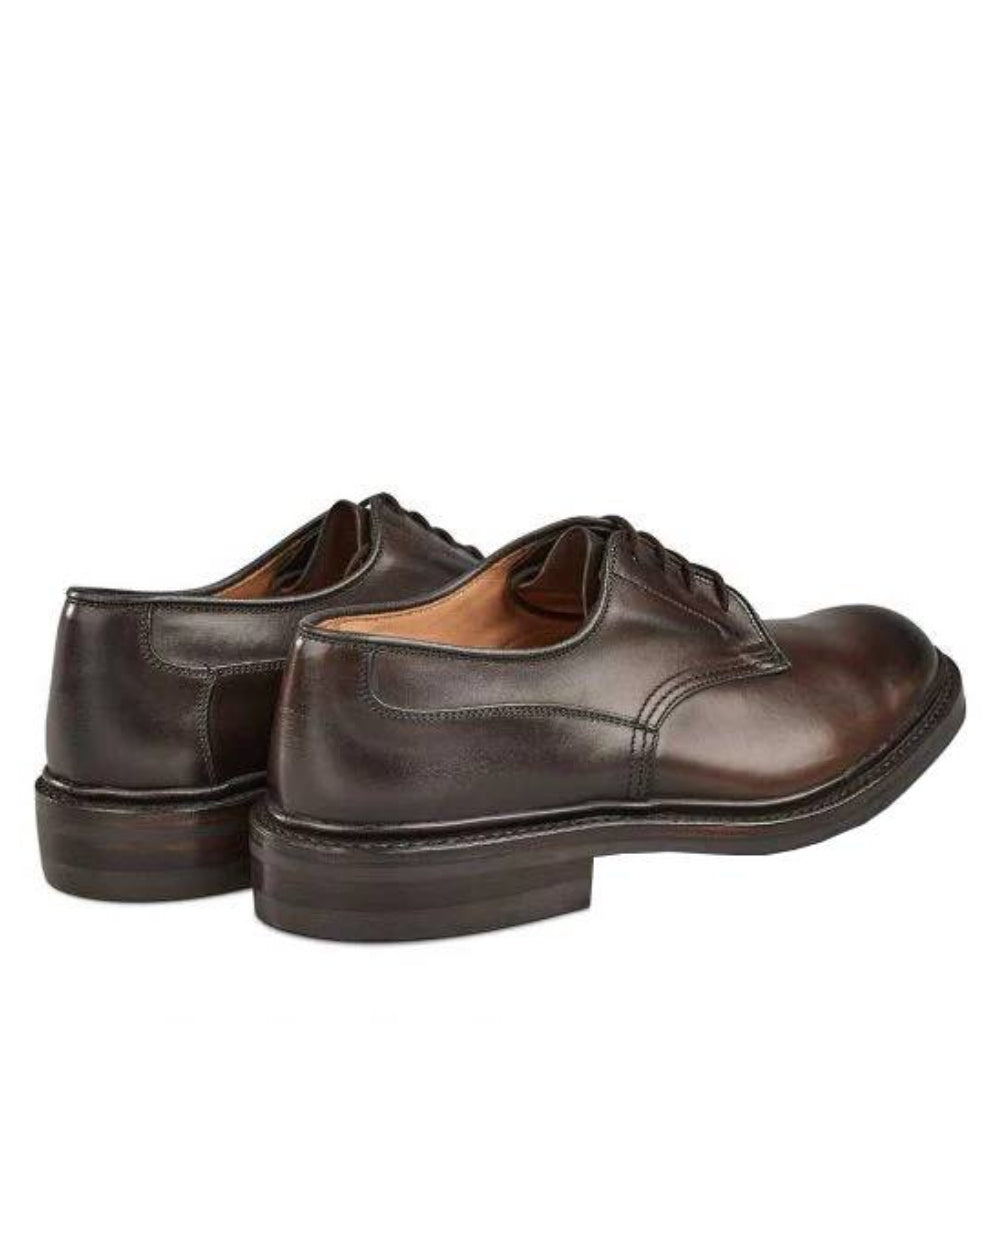 Espresso Burnished Coloured Trickers Woodstock Plain Derby Shoe Dainite Sole On A White Background 